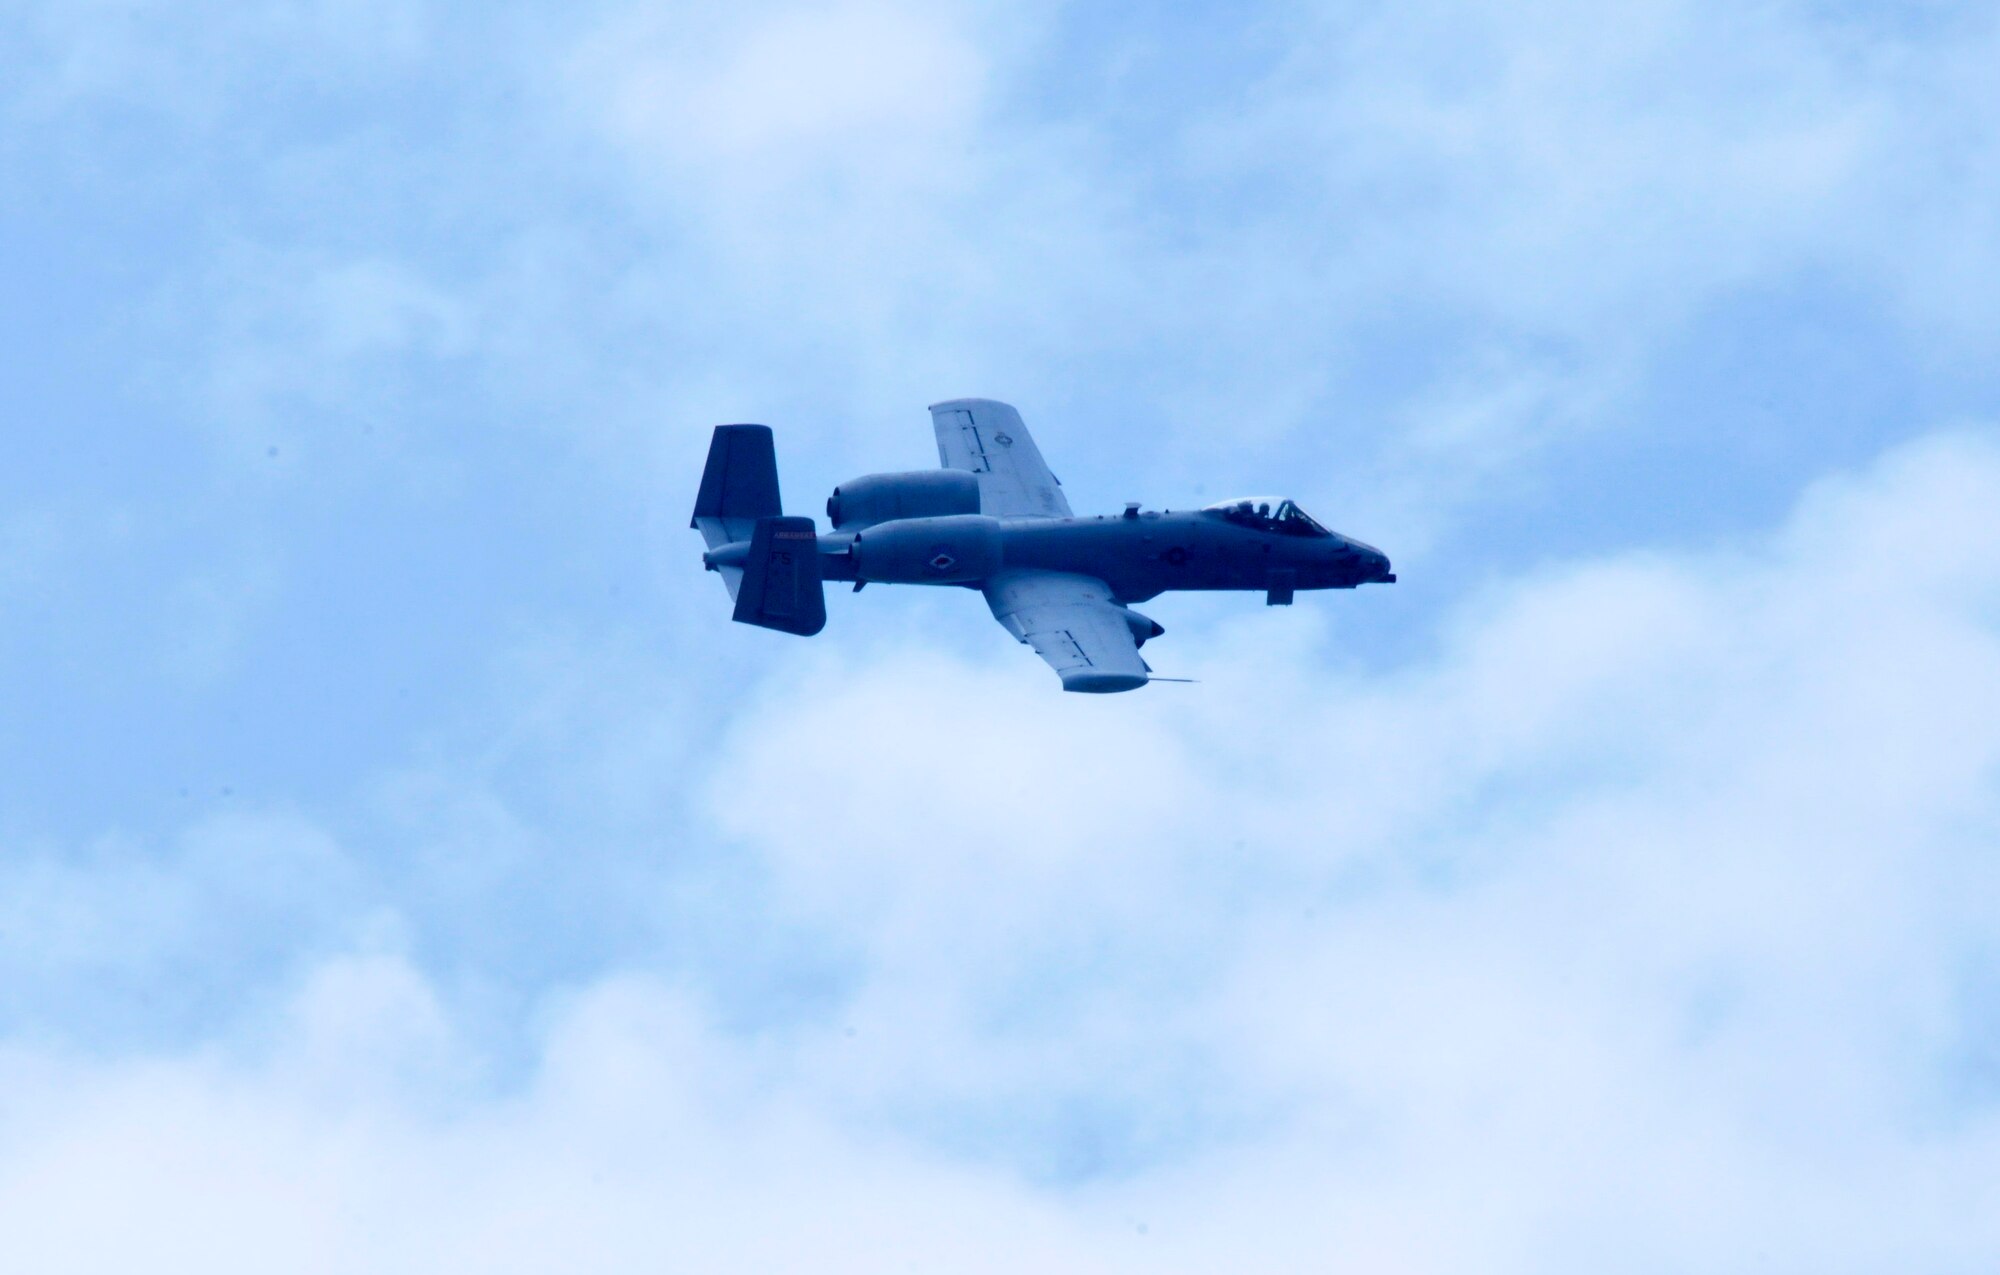 Col. Mark W. Anderson, 188th Fighter Wing commander, flies his final training mission in an A-10C Thunderbolt II “Warthog”, at Ebbing Air National Guard Base, Fort Smith, Arkansas, May 12, 2014. The ceremonial "fini" flight was Anderson’s final sortie until he flies the last A-10 out of Ebbing ANG Base June 7, 2014, following the wing’s conversion ceremony. The 188th will convert from a fighter mission to a remotely piloted aircraft (MQ-9 Reapers), targeting, intelligence, surveillance and reconnaissance mission. (U.S. Air National Guard photo by Tech. Sgt. Josh Lewis/released)  